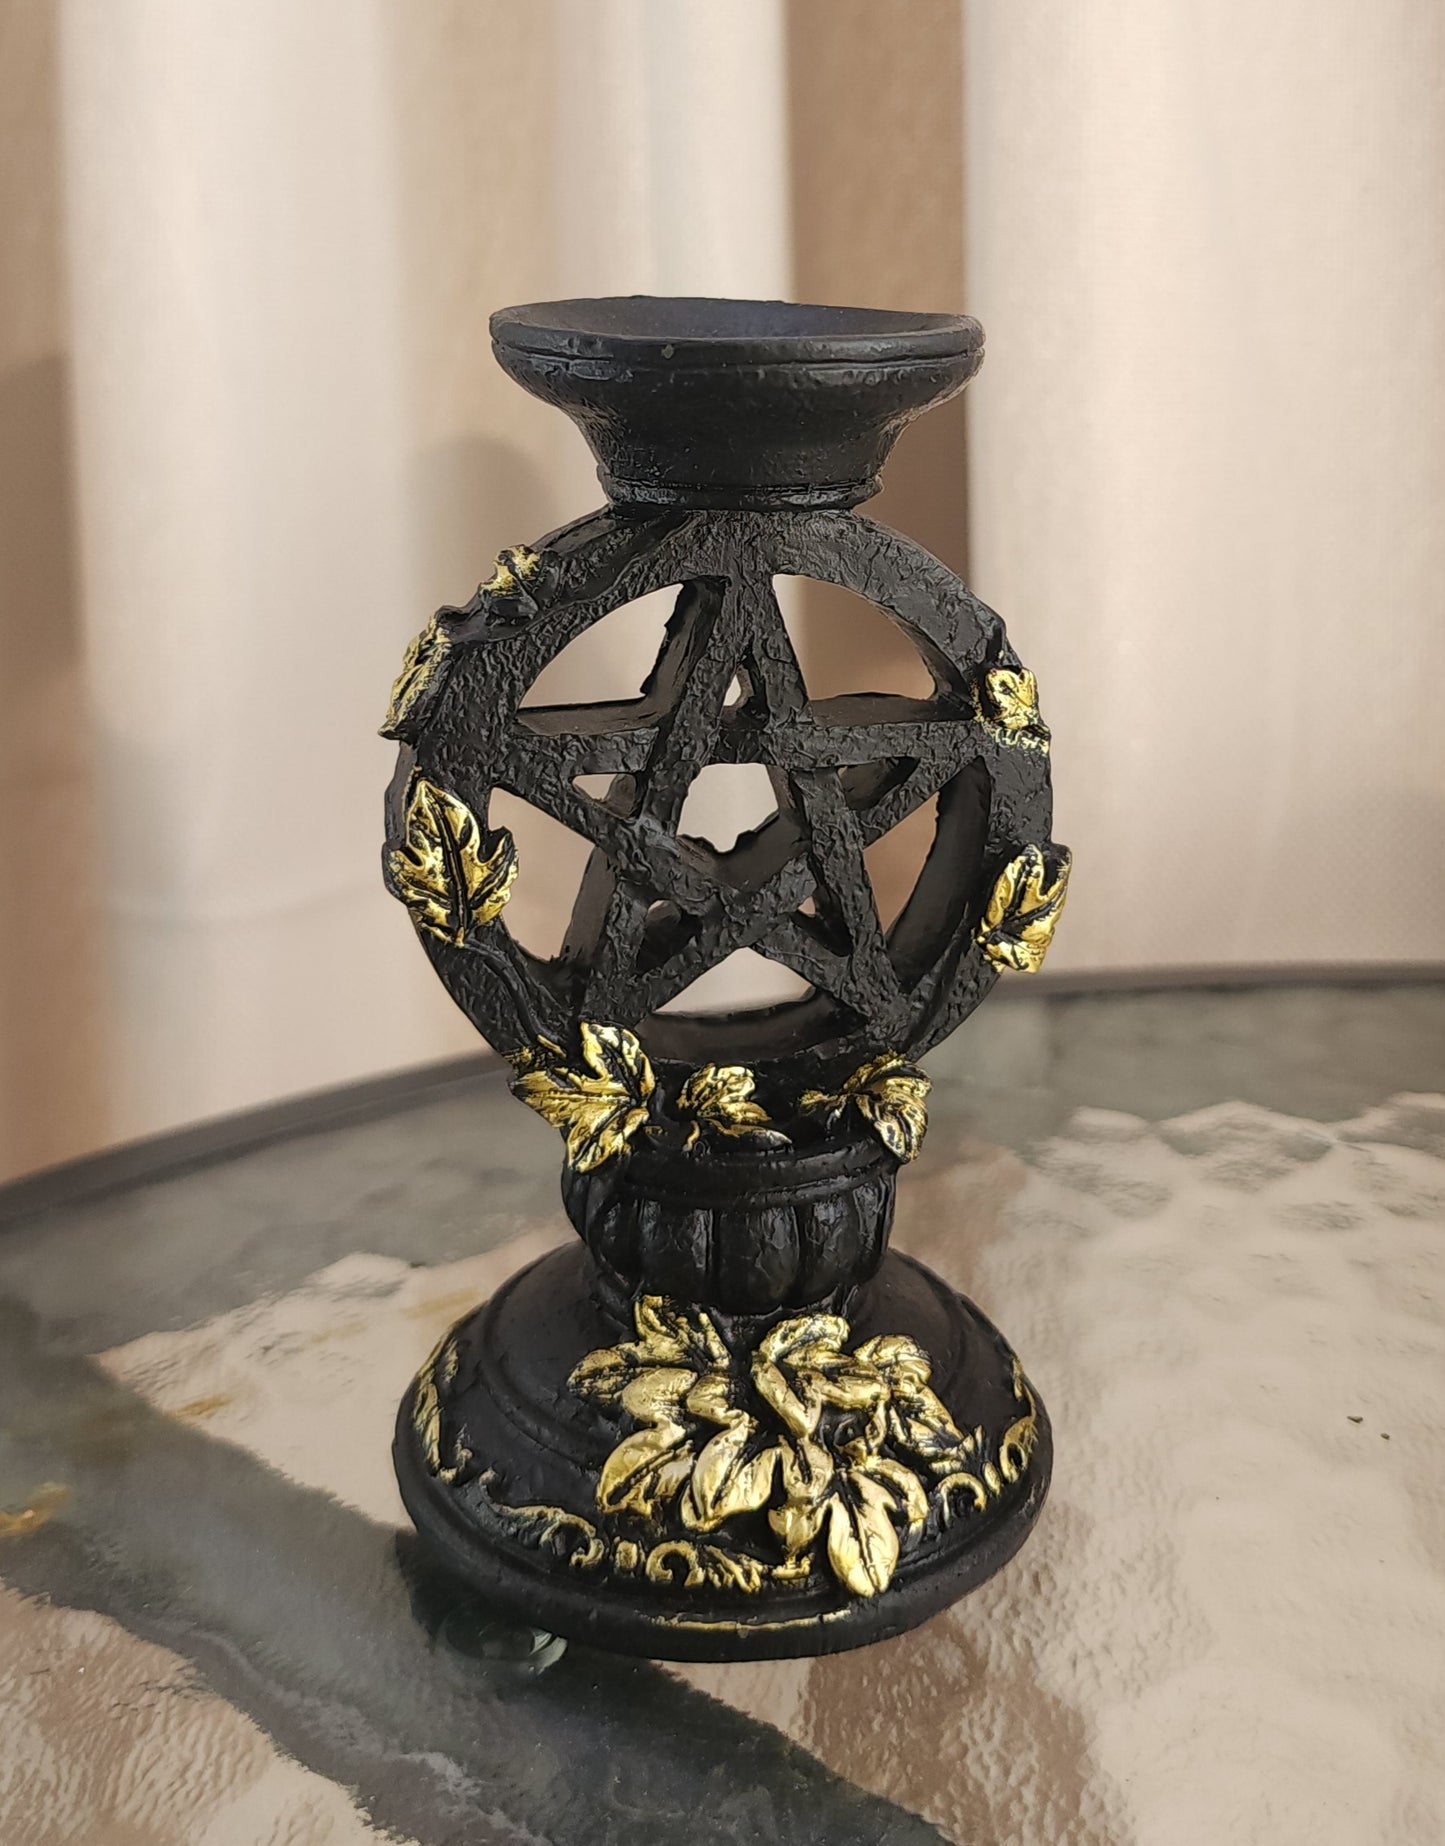 Pentacle Sphere Stand - Black & Gold